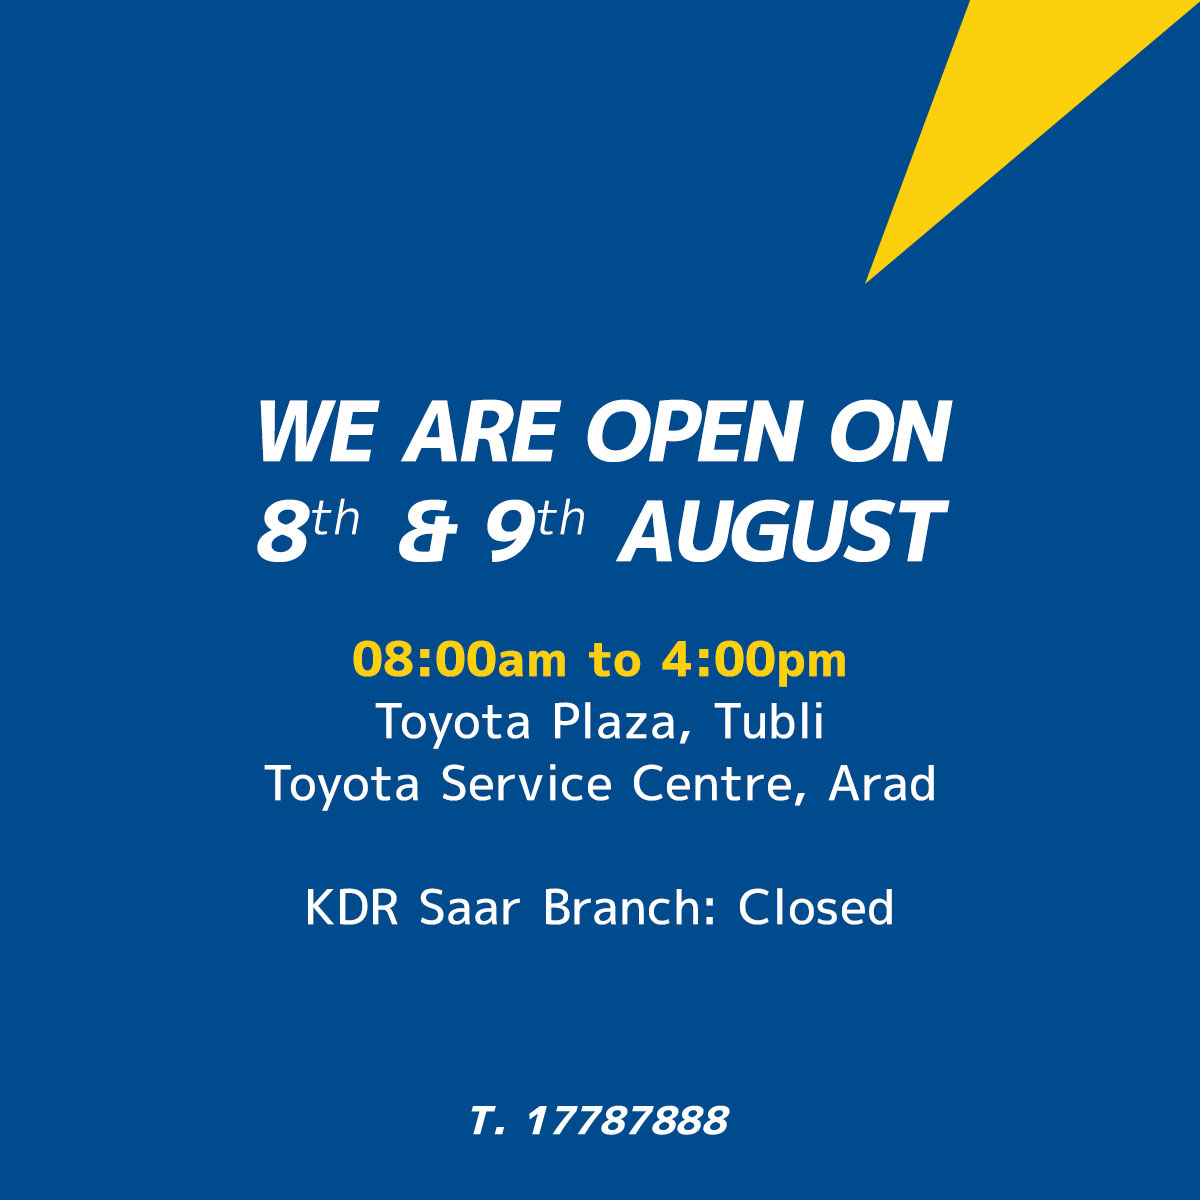 WE ARE OPEN ON 8th & 9th AUGUST